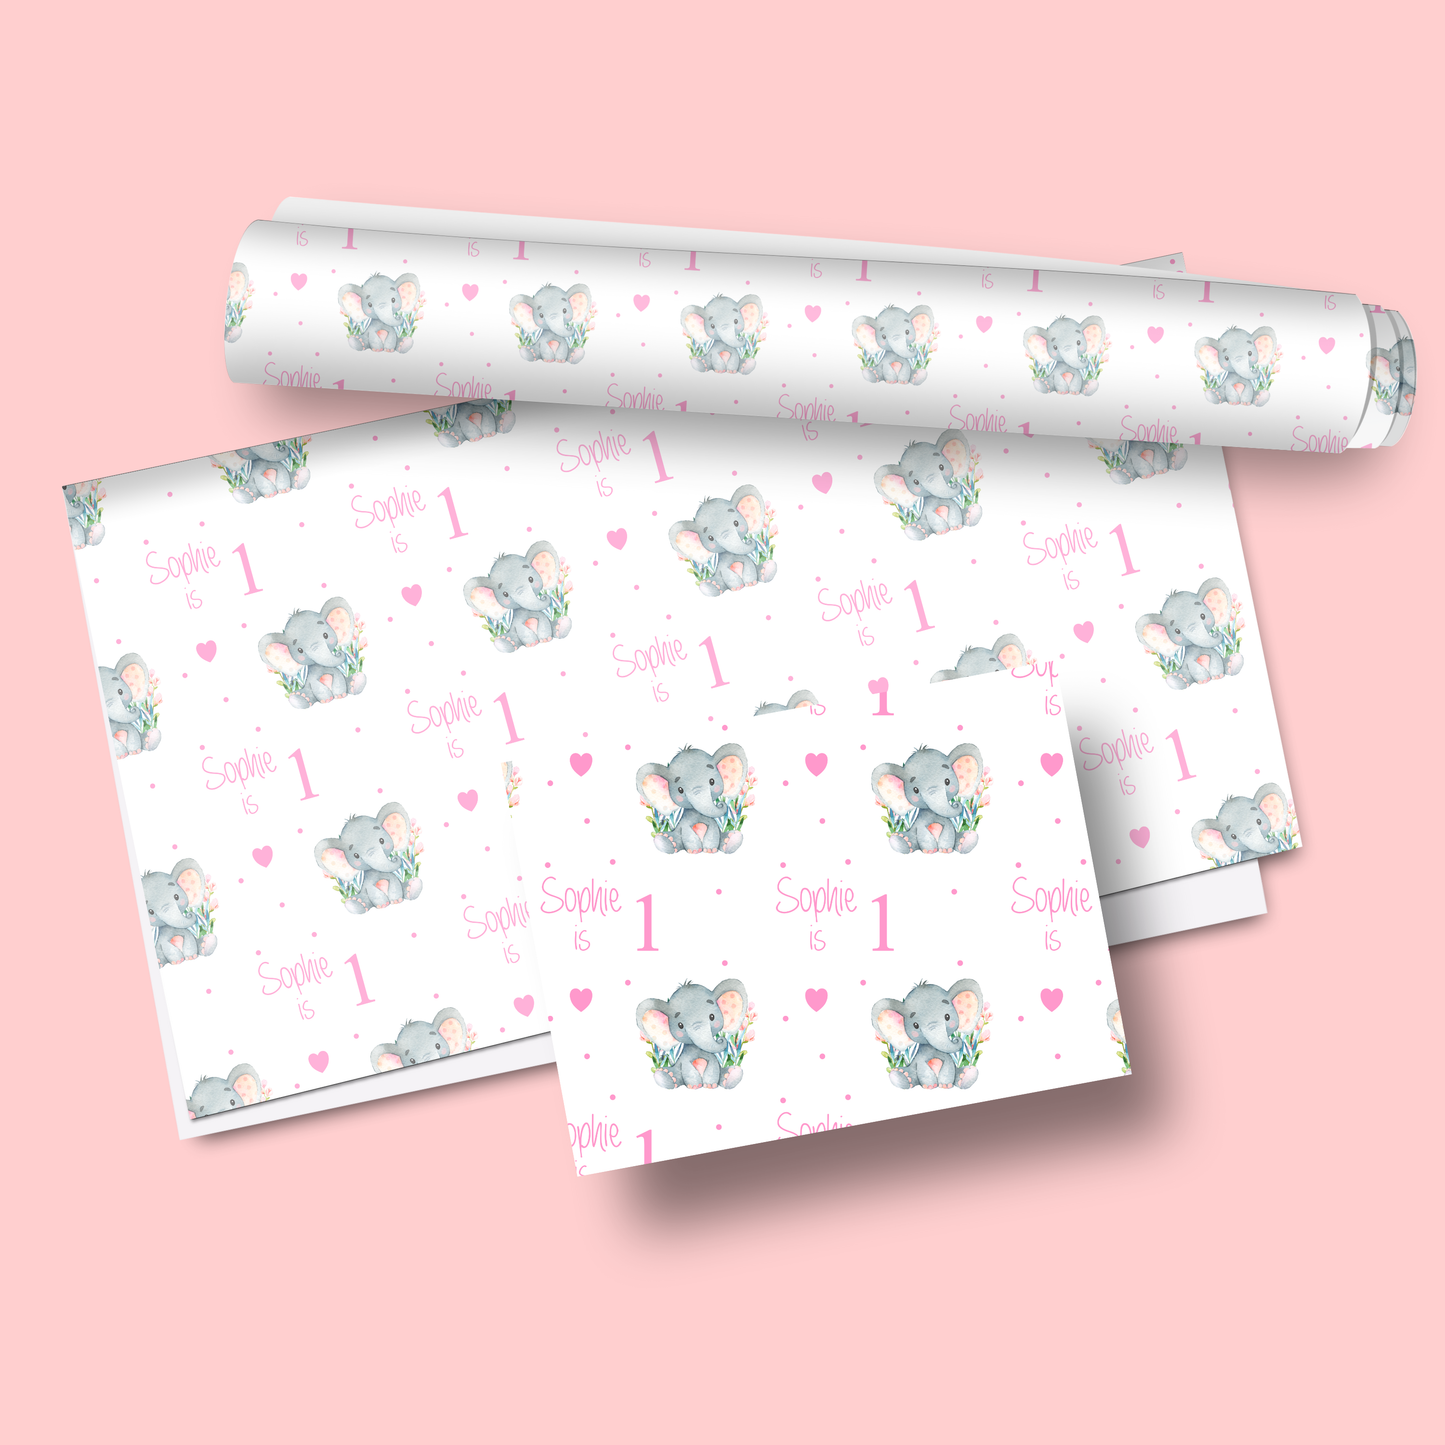 a roll of wrapping paper on a pink background